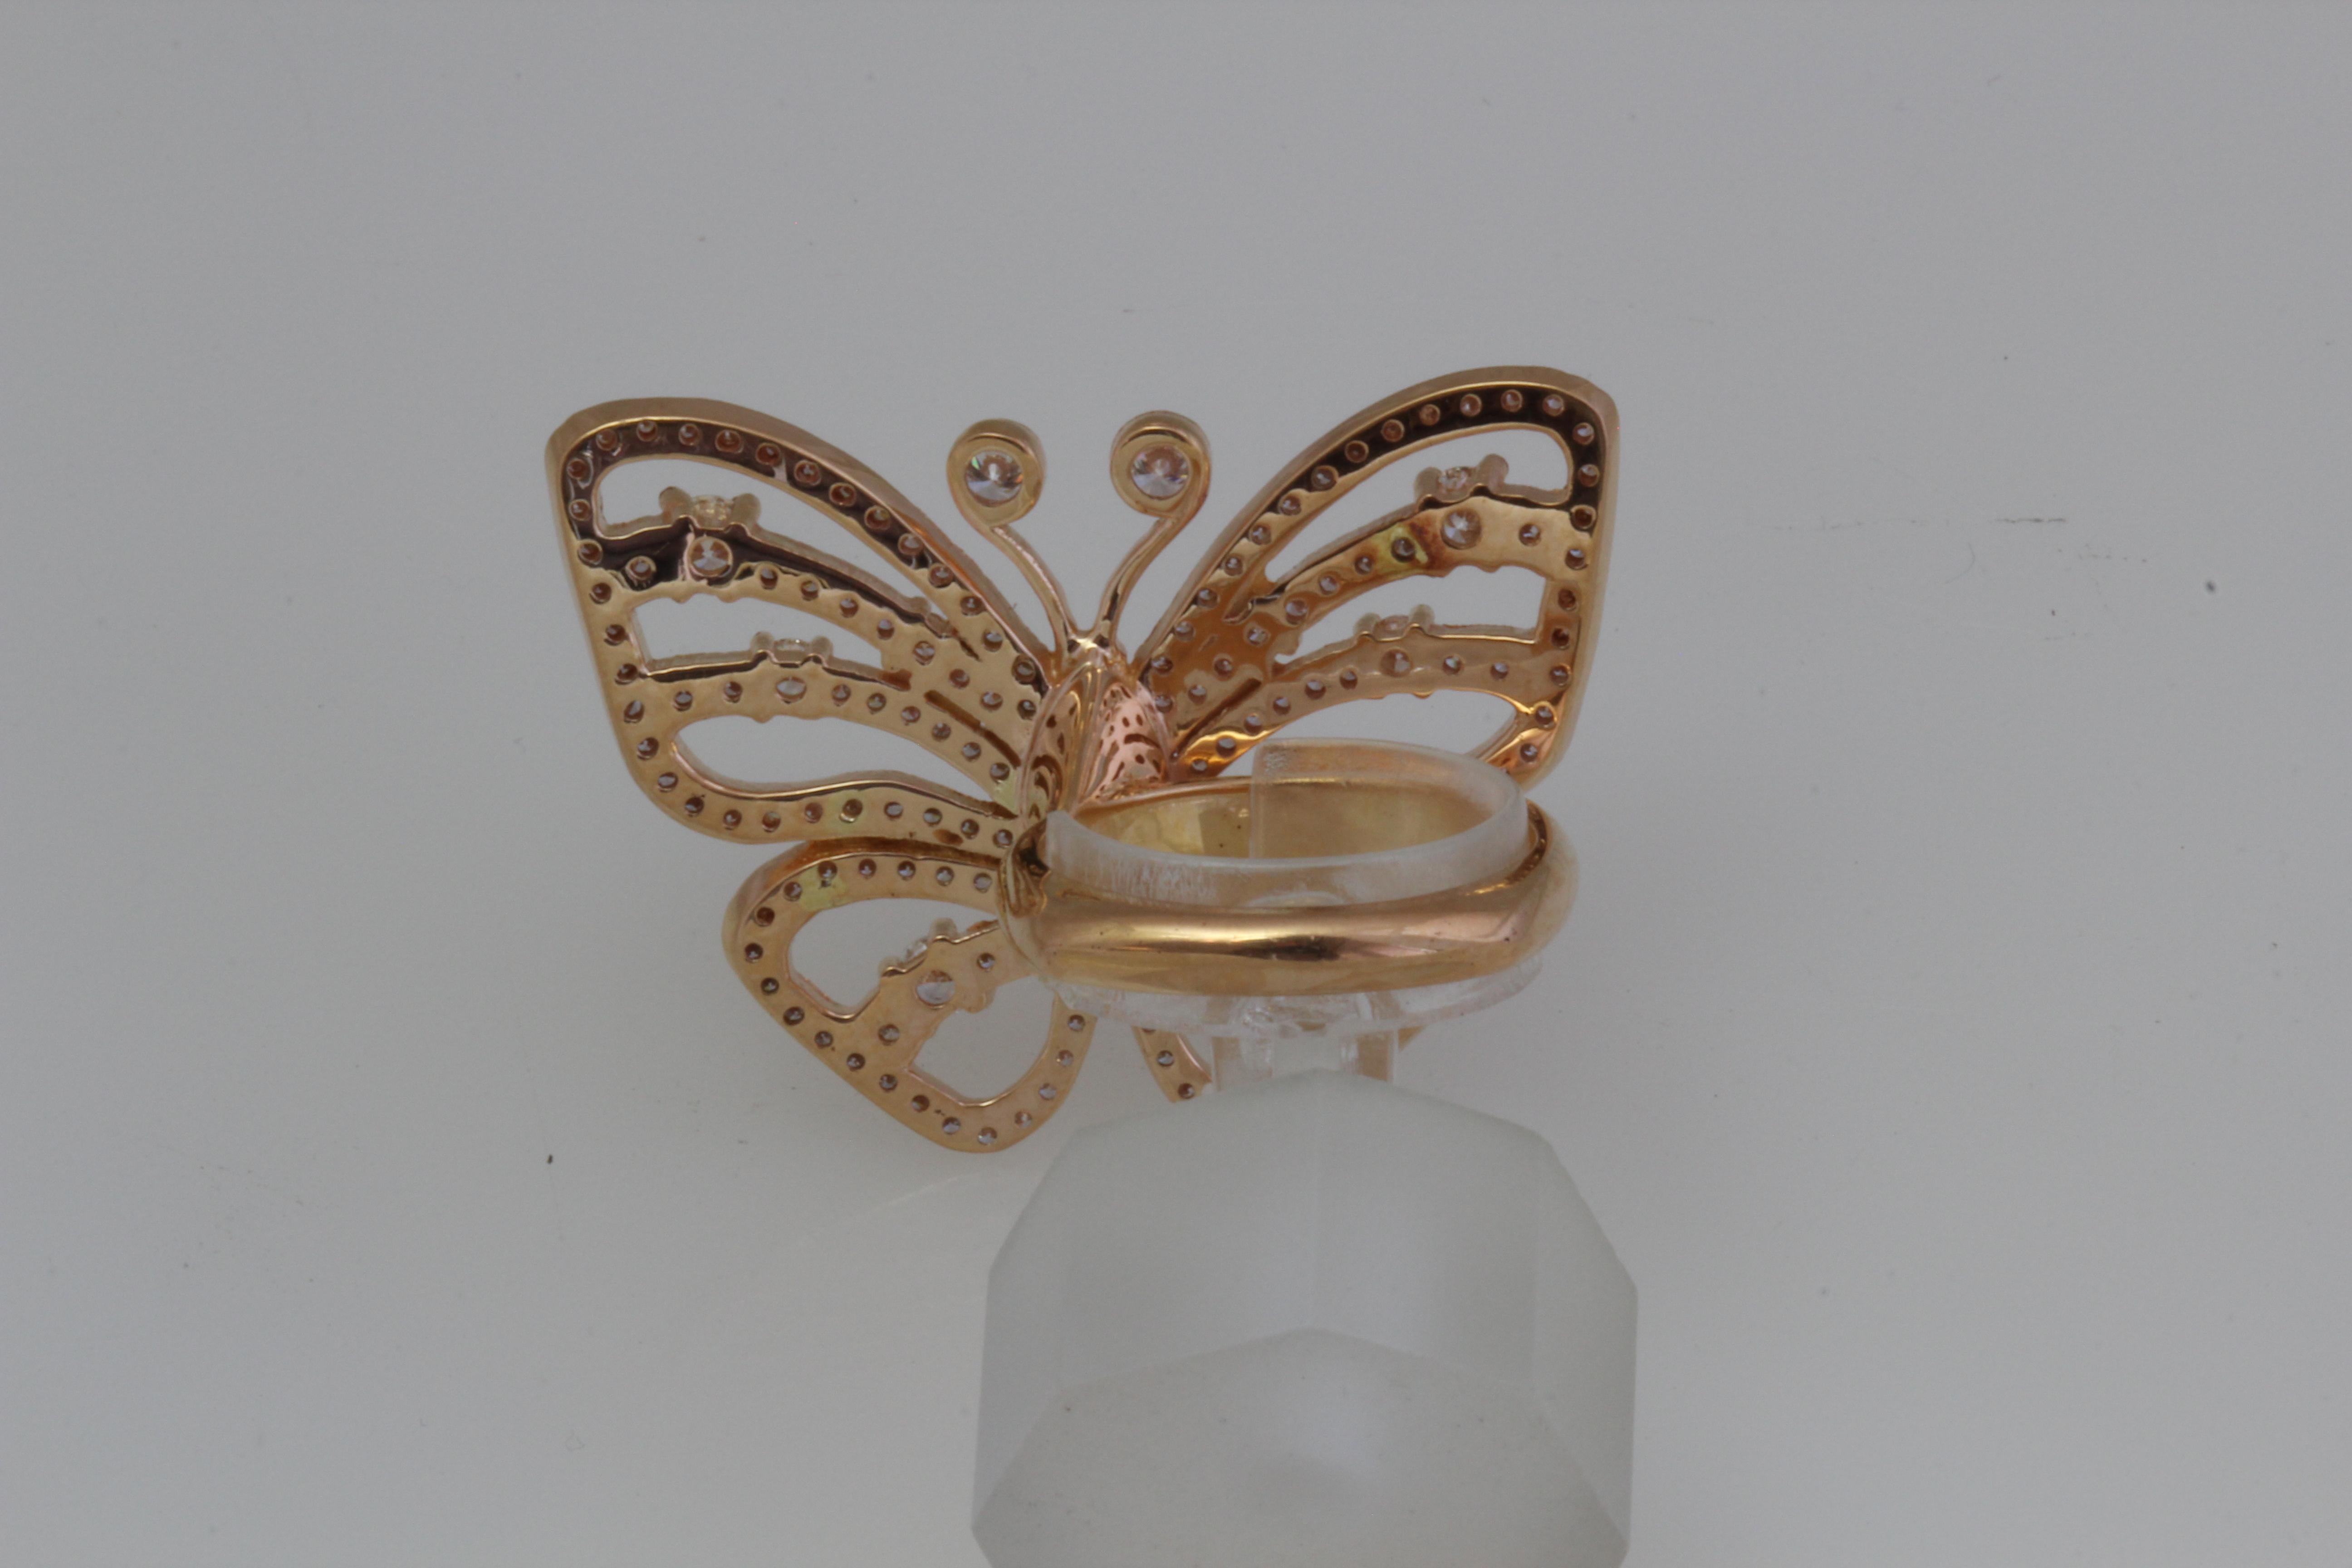 Will be made to order depending on your finger size, allow 3-6 weeks. If you need it sooner let us know and we will tell you if we can accommodate you.

Crafted of 18k Rose Gold Butterfly Ring set with diamonds,  

White natural diamonds no